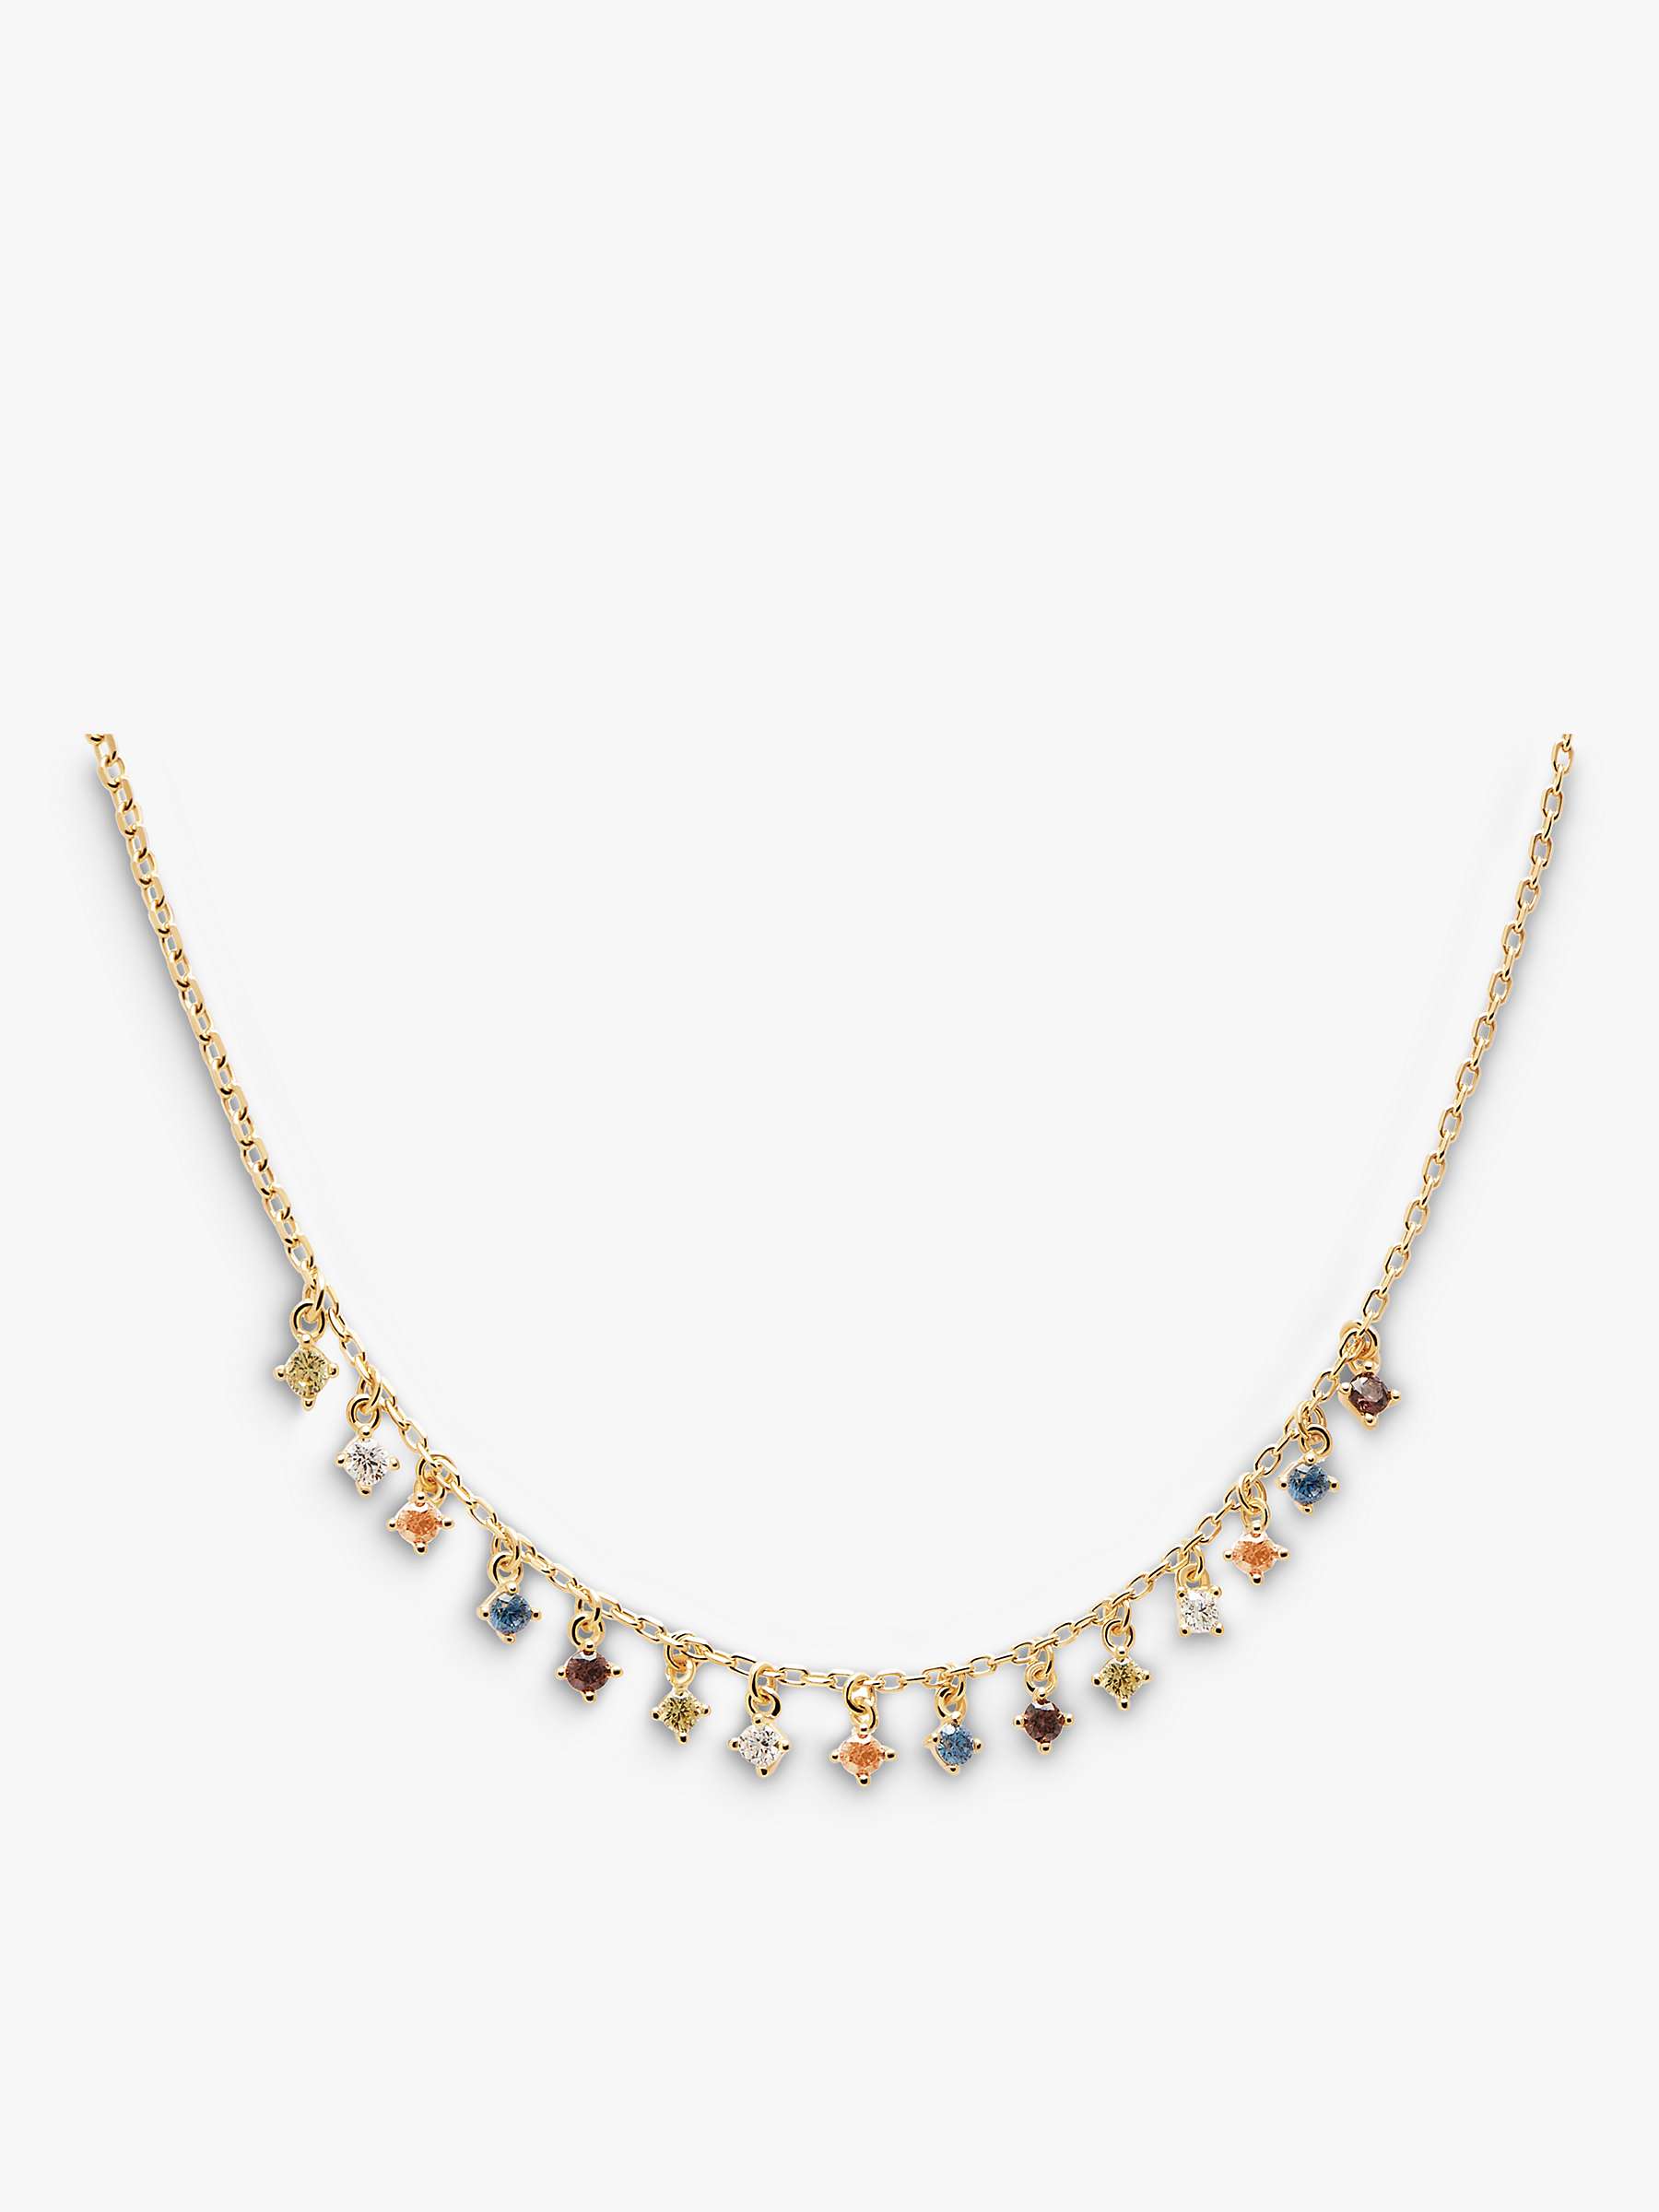 Buy PDPAOLA Cubic Zirconia Charm Drop Chain Necklace, Gold/Multi Online at johnlewis.com